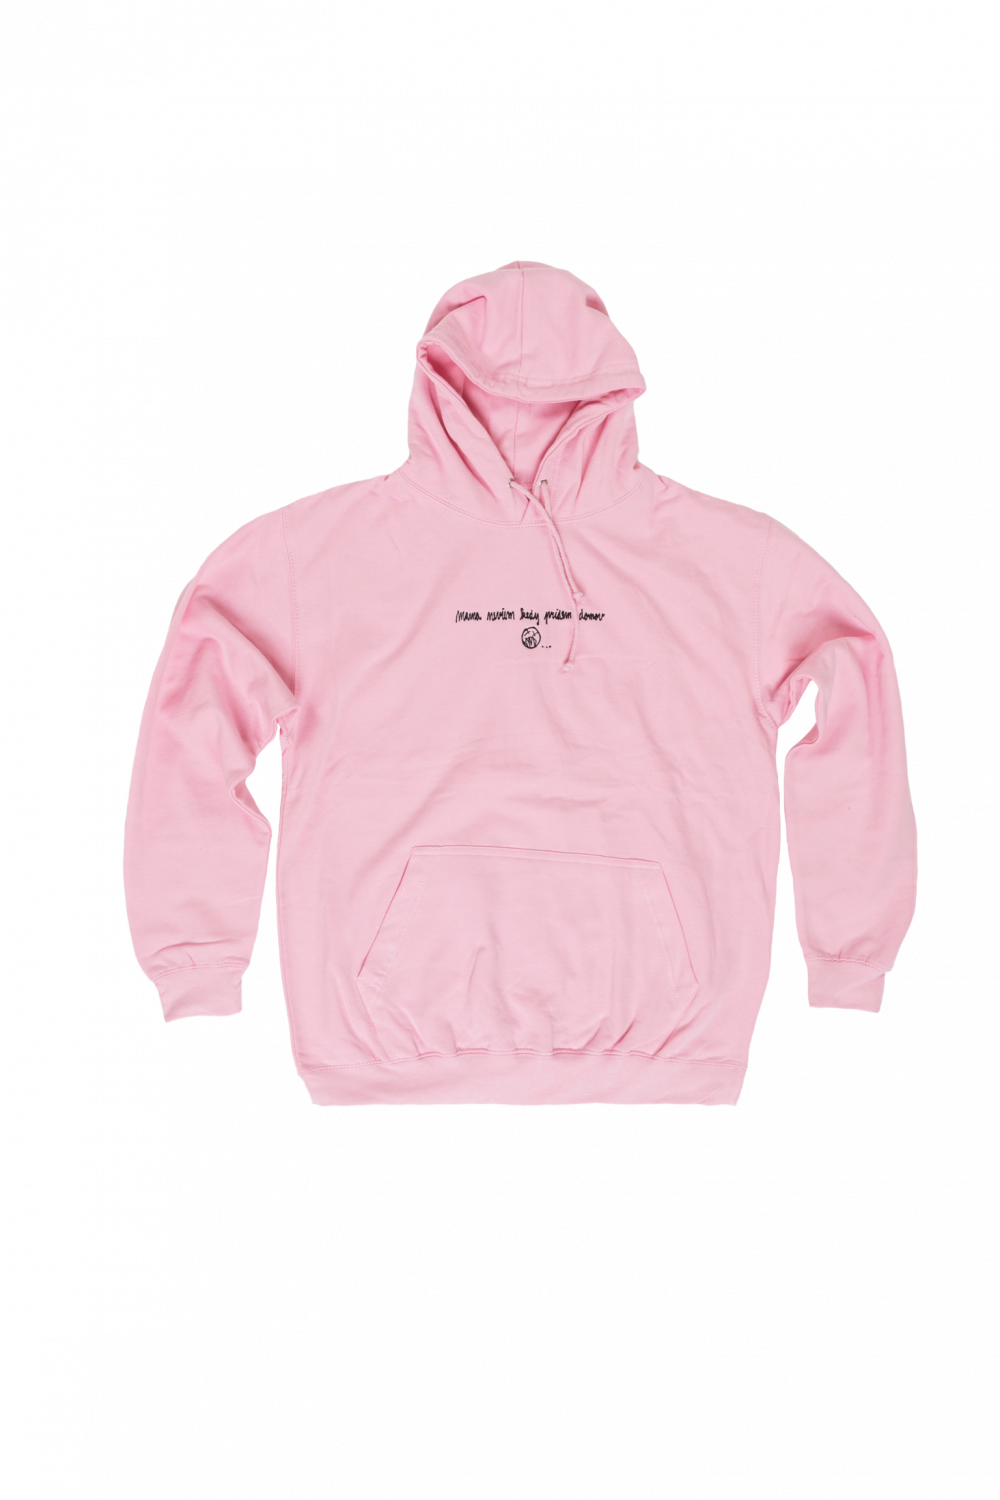 MNKPD Baby Pink | F*CKTHEM OFFICIAL STORE